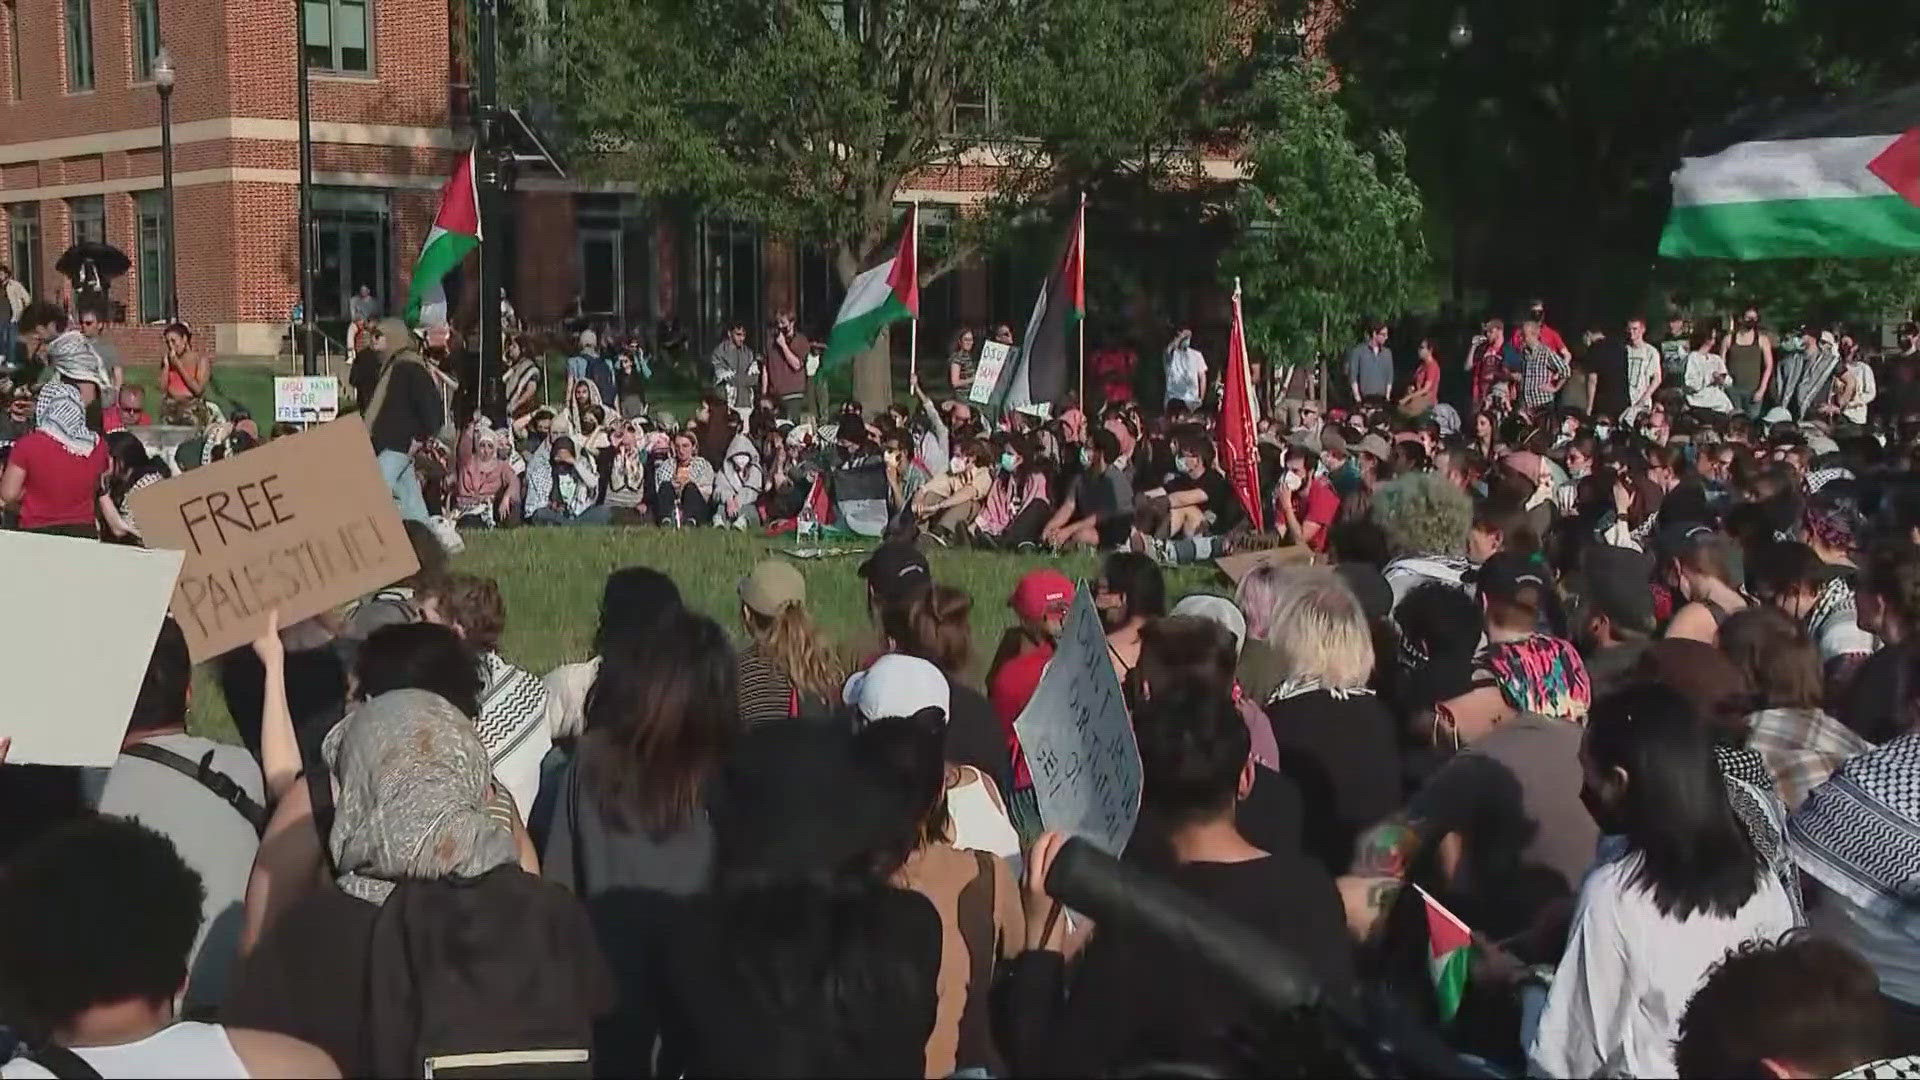 Many attendees came to the protest with signs and flags in support of Palestine.